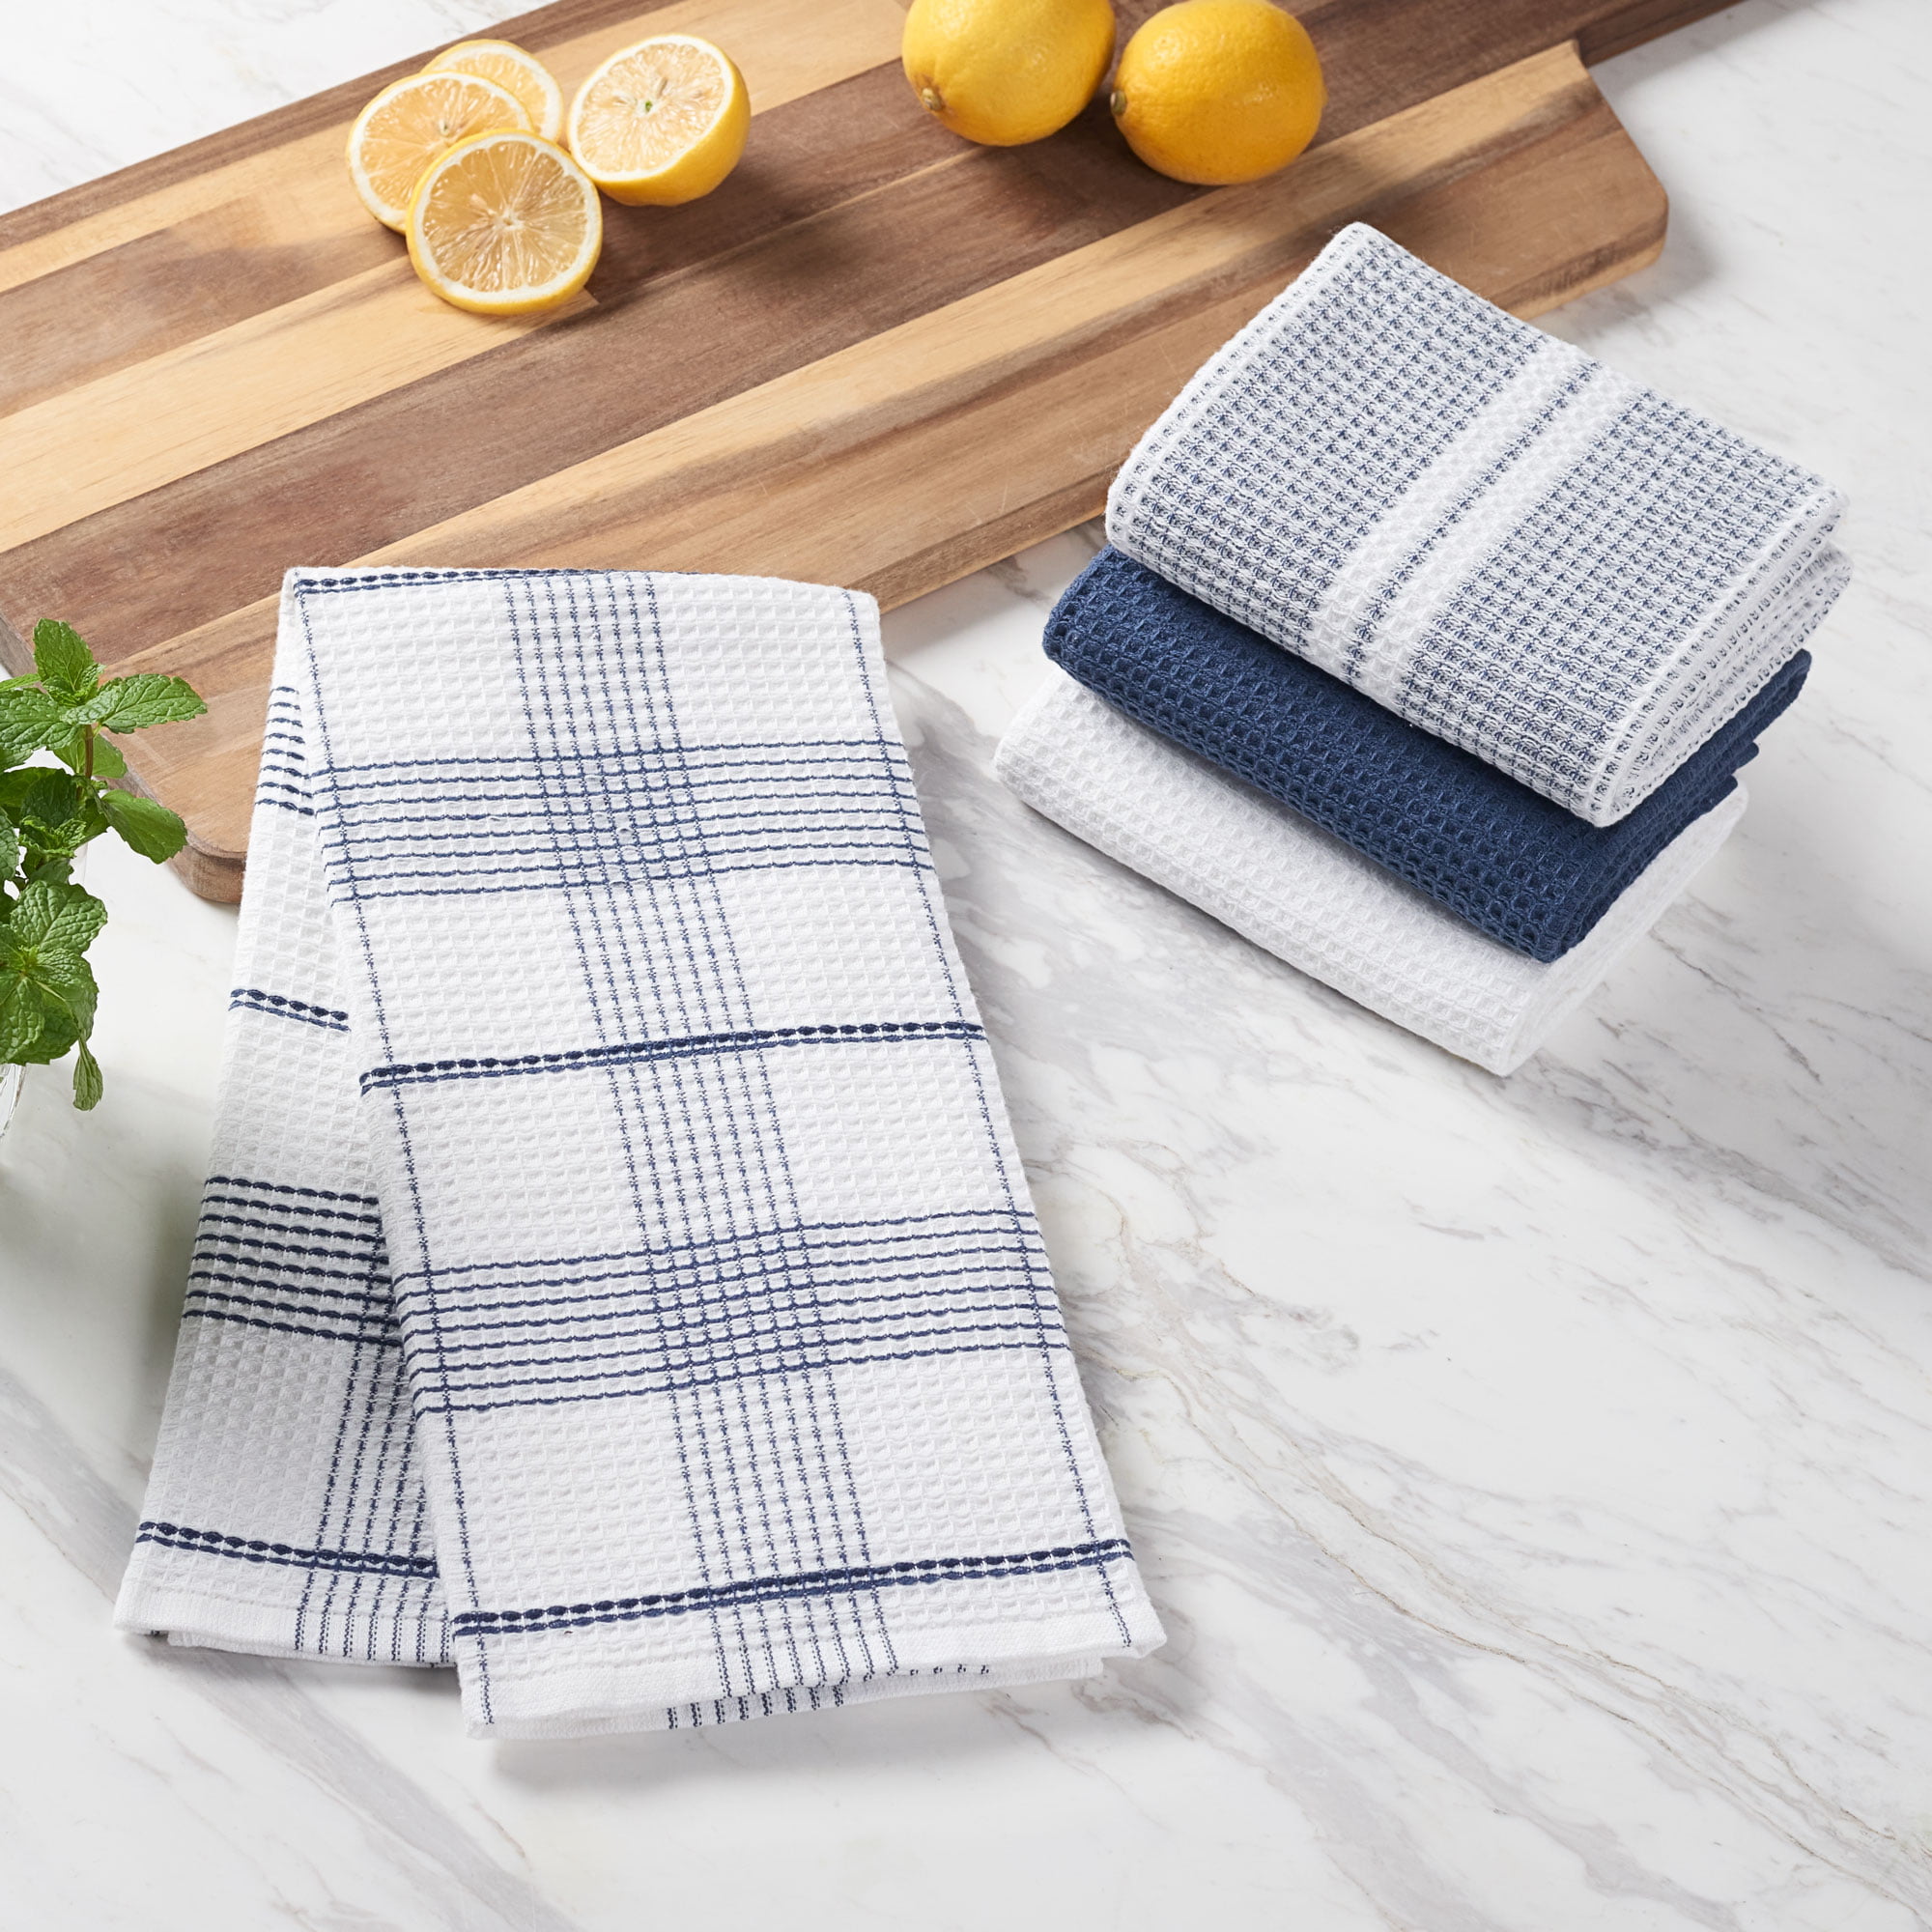 Blue and White Plaid Kitchen Towels - Set of 6 Blue Checkered, 100% Cotton,  Lint-Free Kitchen Towels with Hanging Loop - Versatile Uses Including